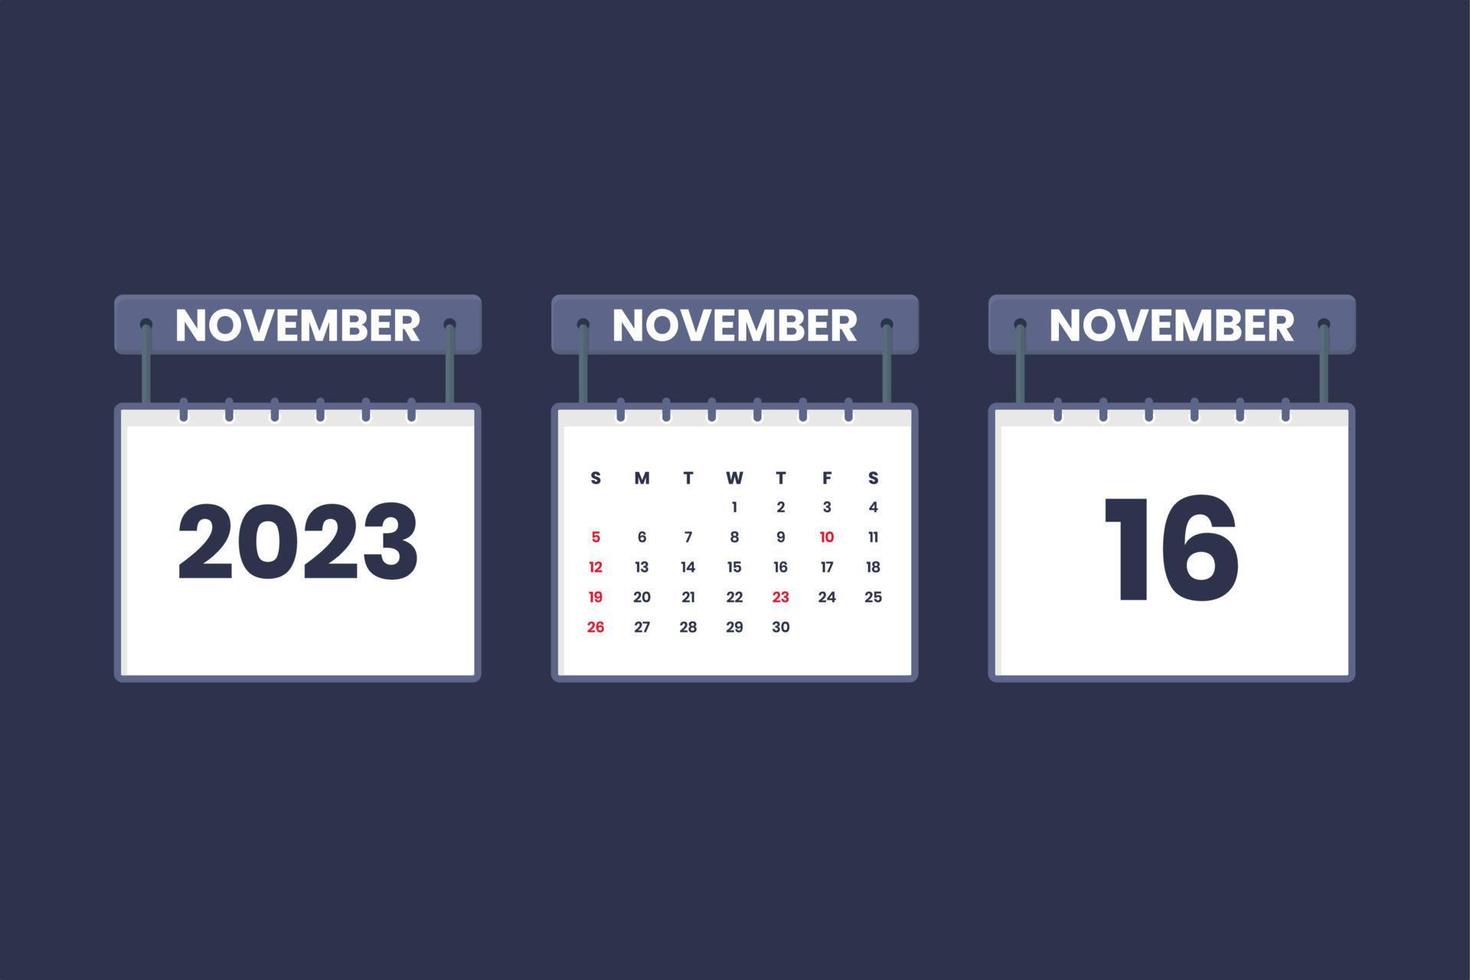 16 November 2023 calendar icon for schedule, appointment, important date concept vector